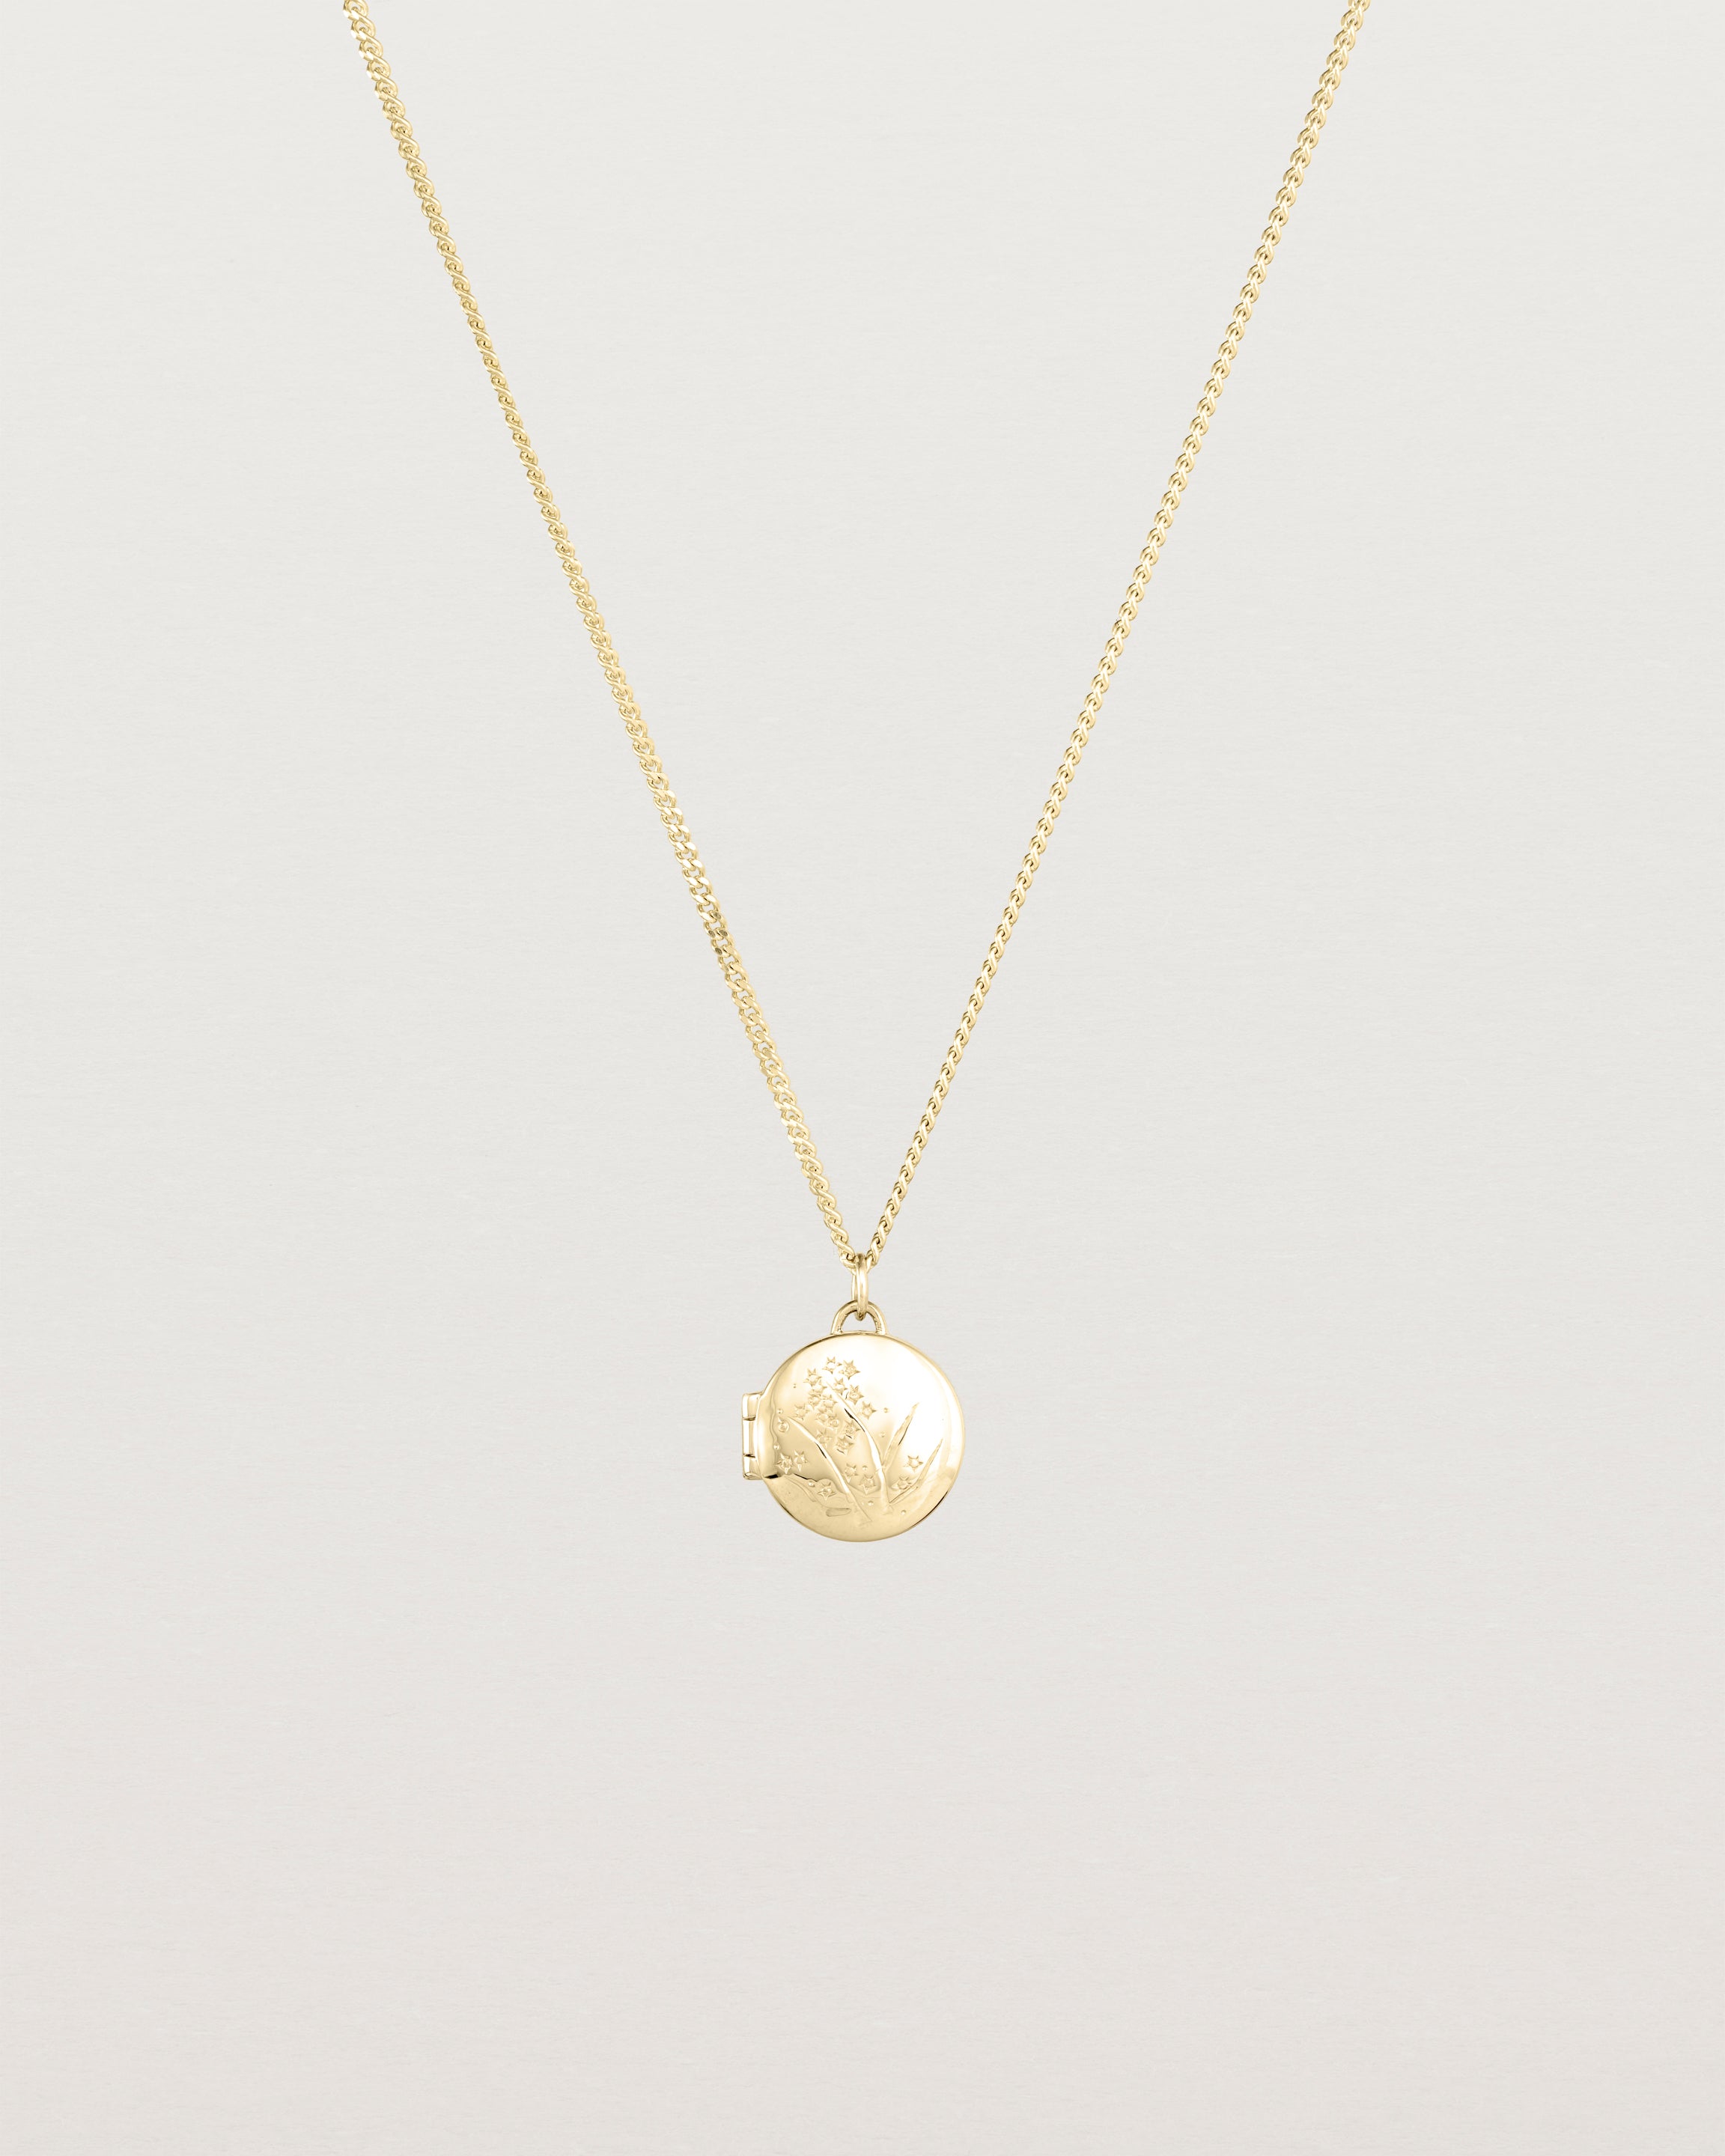 Shop Necklaces | Initial & Gold Necklaces | Natalie Marie Jewellery ...